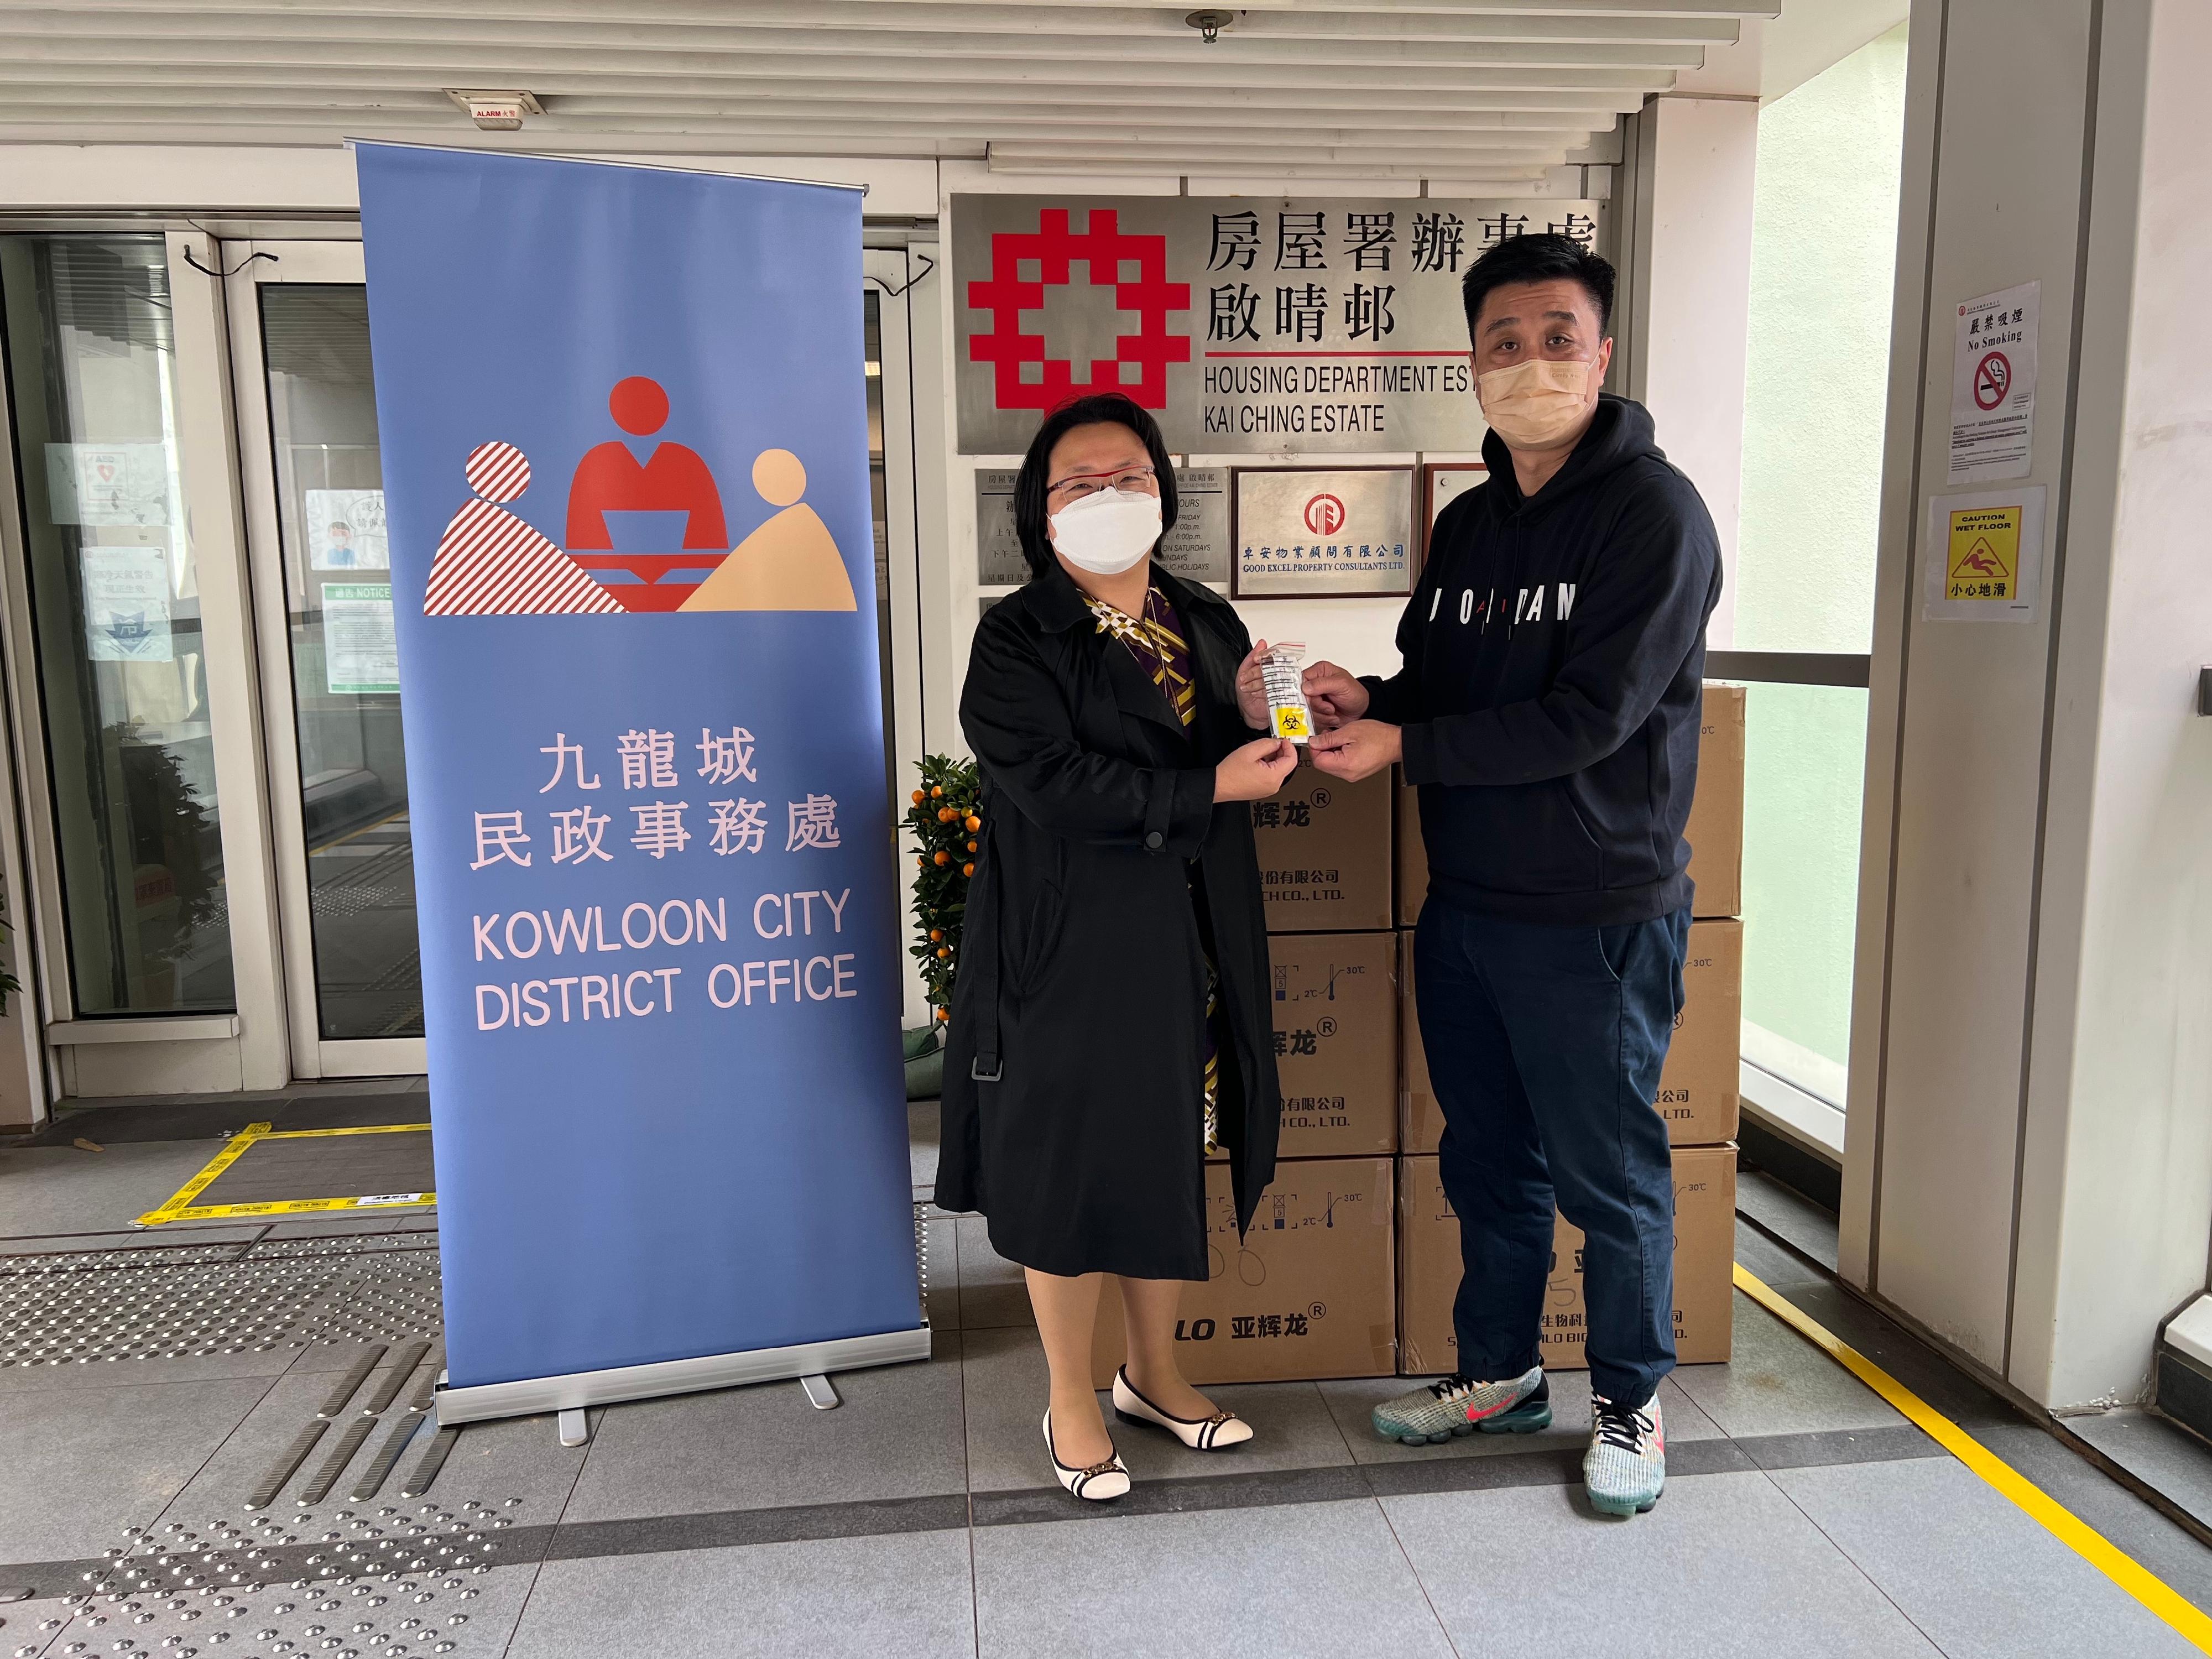 The Kowloon City District Office today (February 6) distributed COVID-19 rapid test kits to households, cleansing workers and property management staff for voluntary testing through the property management company of Kai Ching Estate.